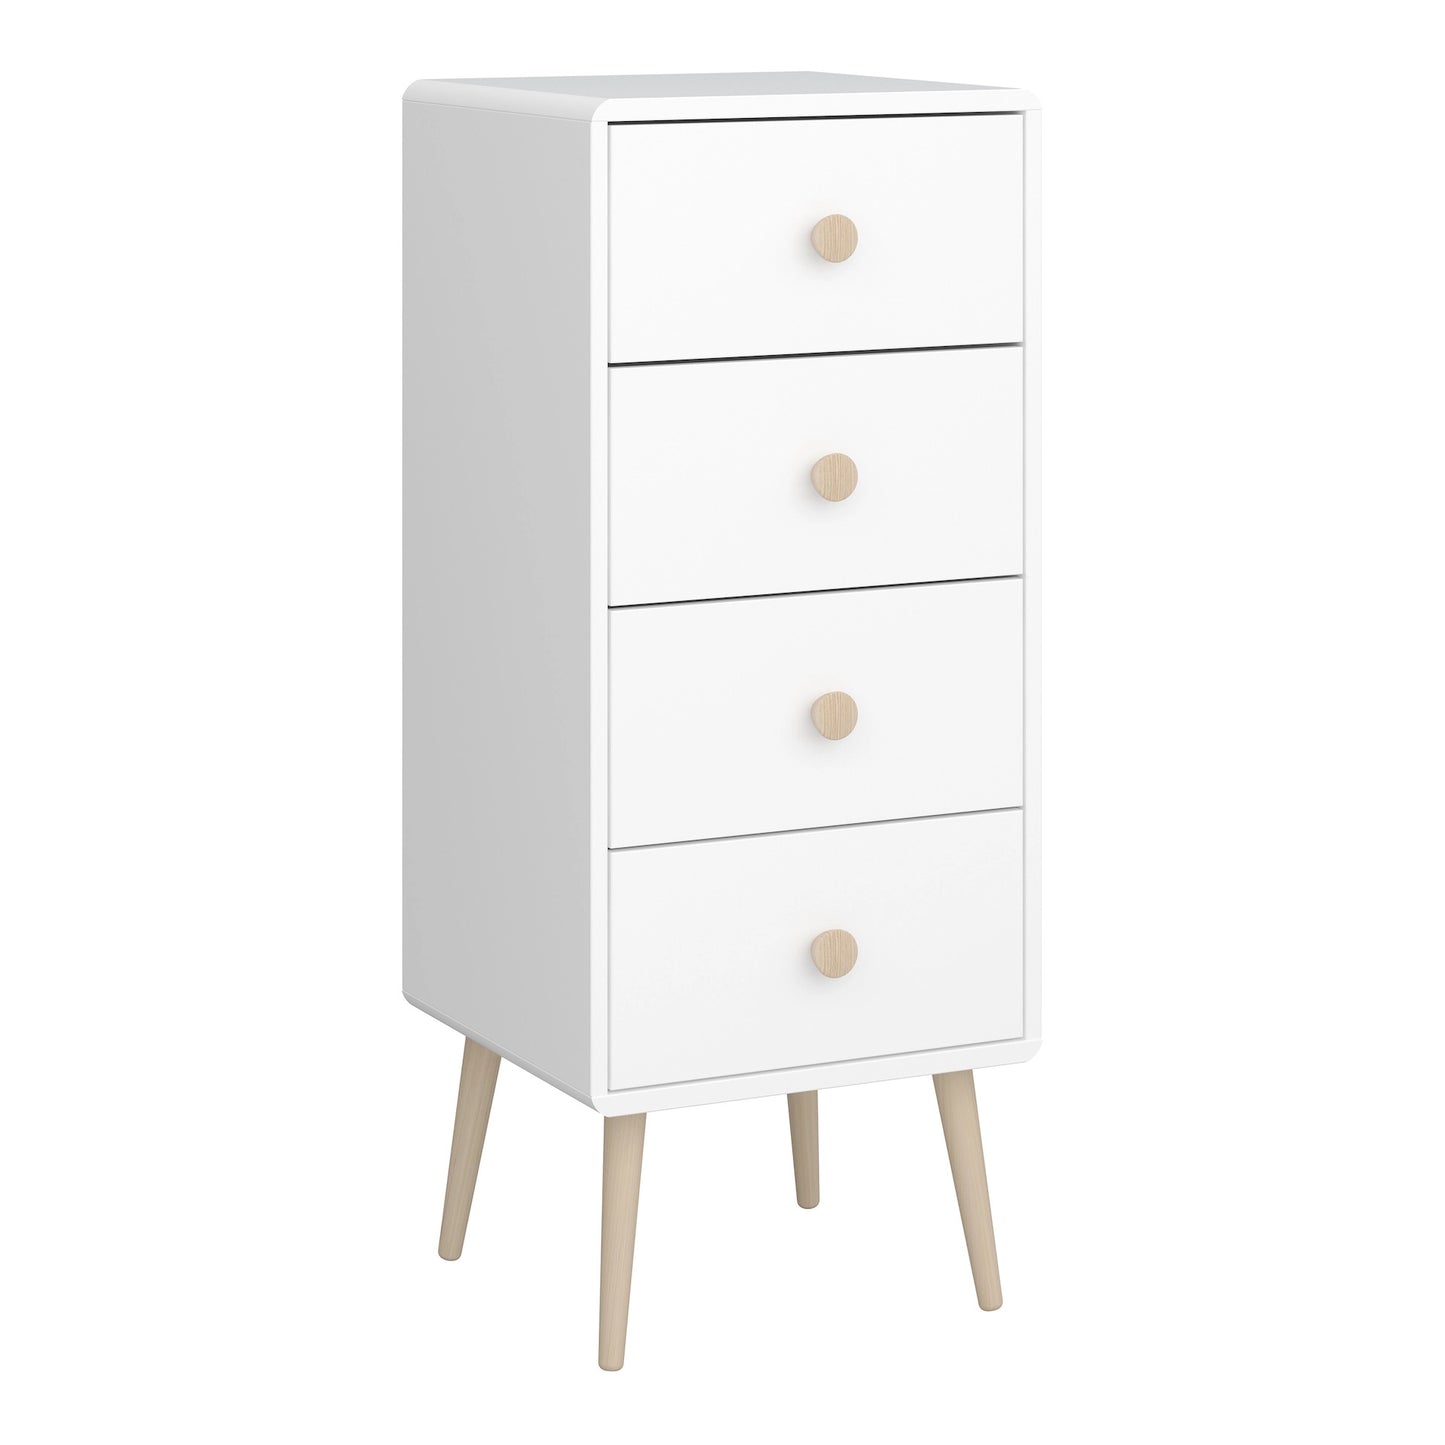 Furniture To Go Gaia 4 Drawer Chest in Pure White